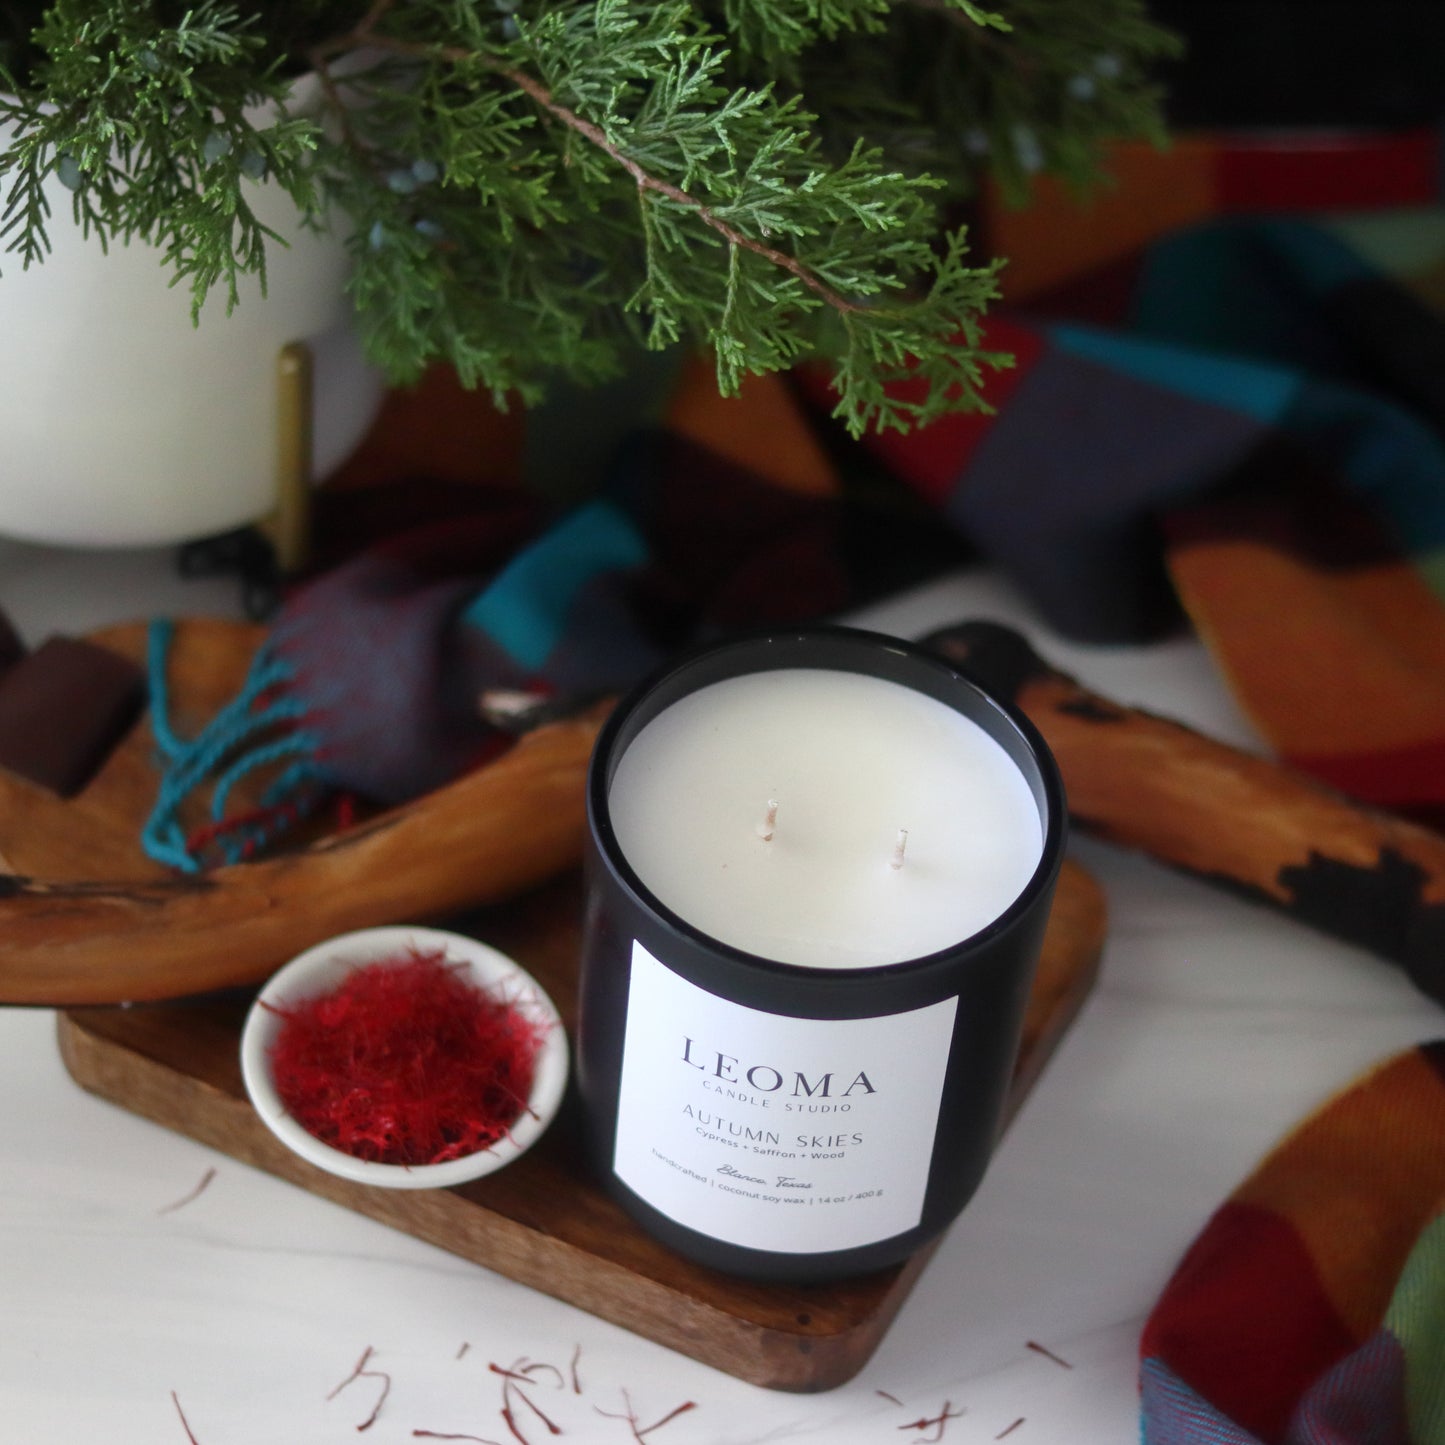 Handcrafted eco-friendly scented candle. Natural coconut & soy wax, toxin-free, 100% cotton wicks. black vessel. Autumn Skies fall scent.